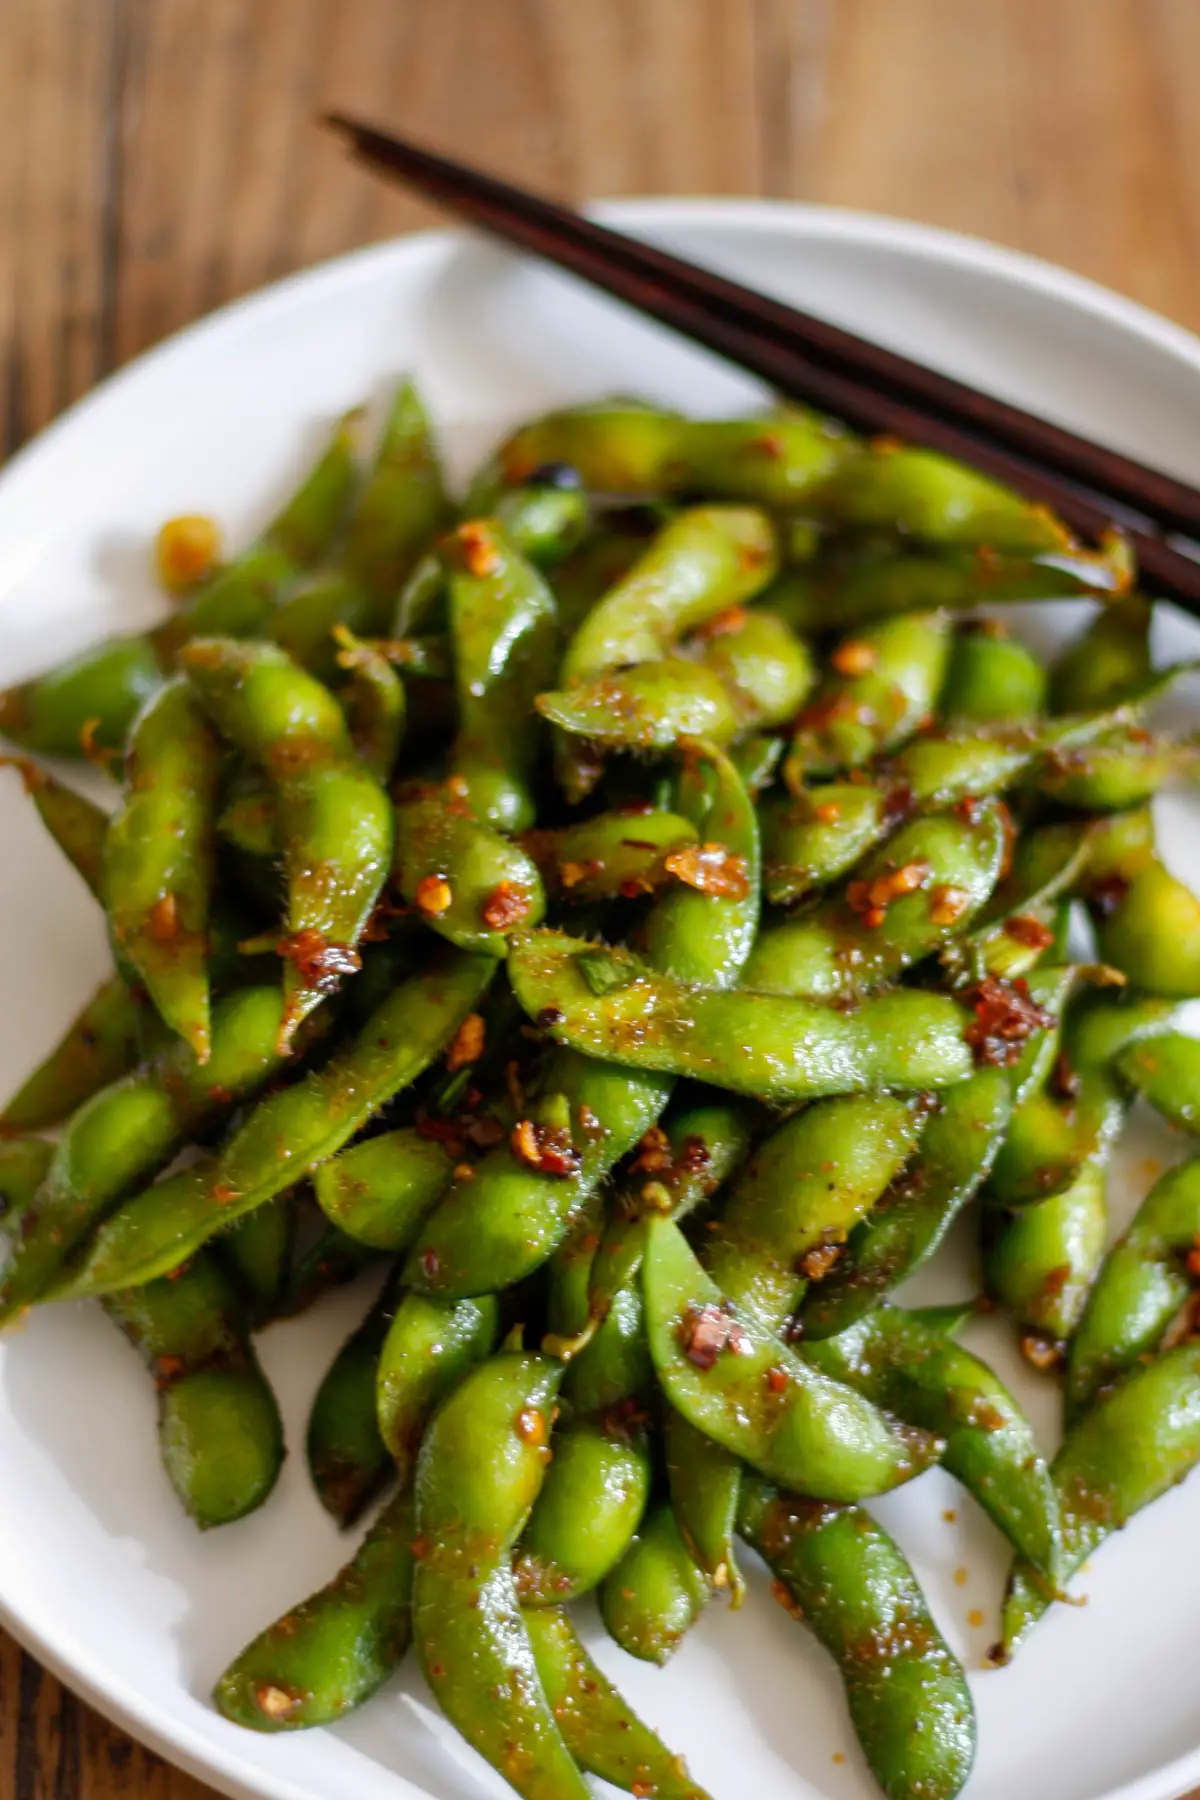 Edamame in the pods with chili sauce on a white plate with a set of chopsticks on the upper right side.